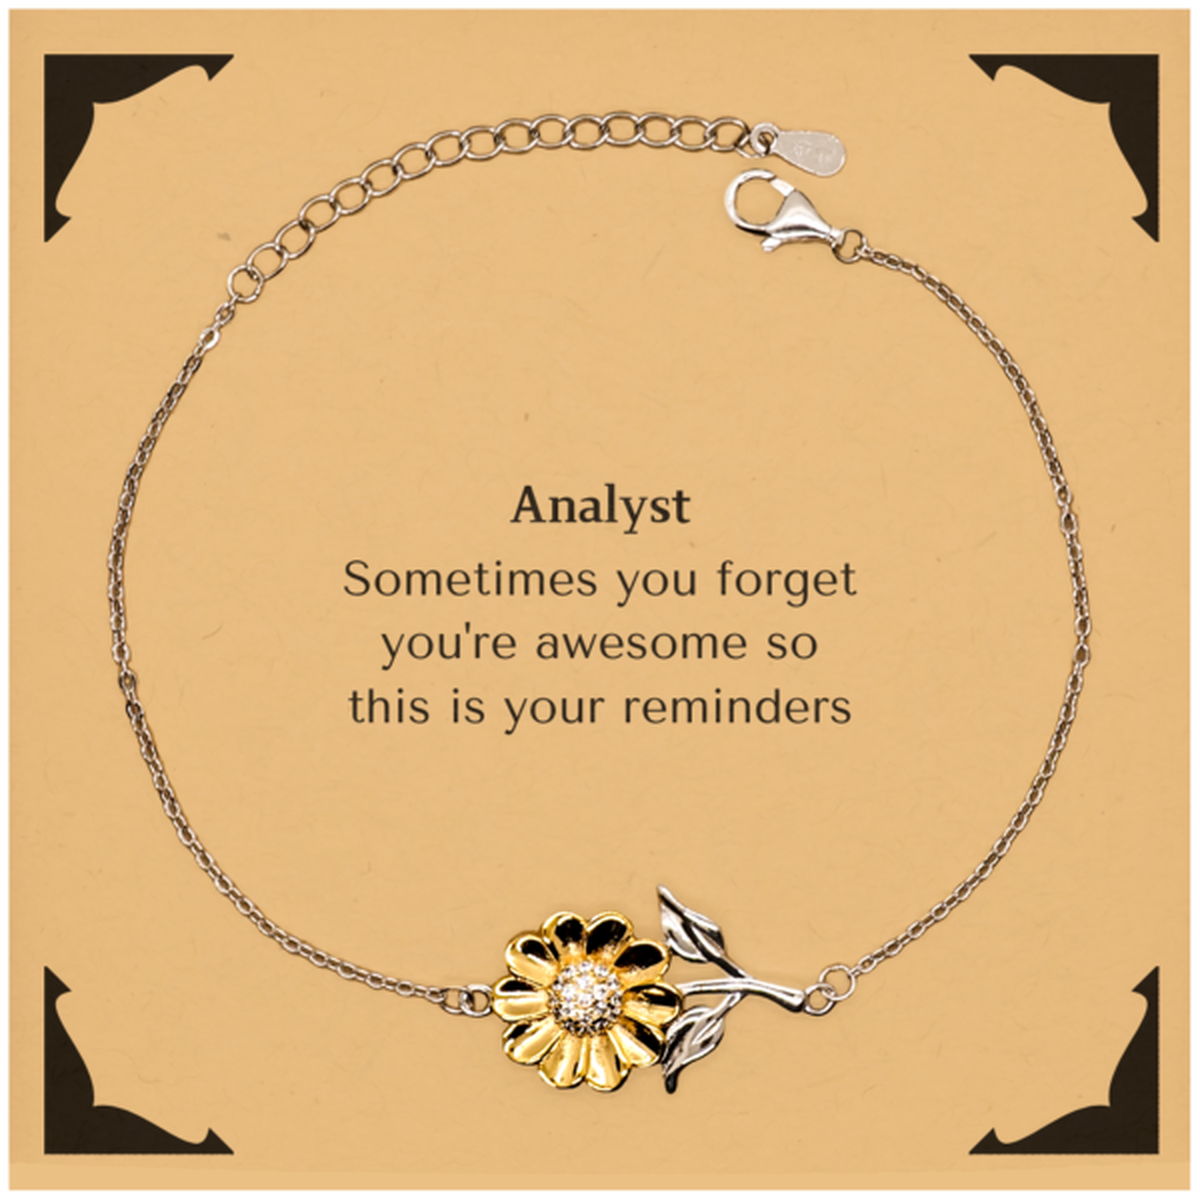 Sentimental Analyst Sunflower Bracelet, Analyst Sometimes you forget you're awesome so this is your reminders, Graduation Christmas Birthday Gifts for Analyst, Men, Women, Coworkers